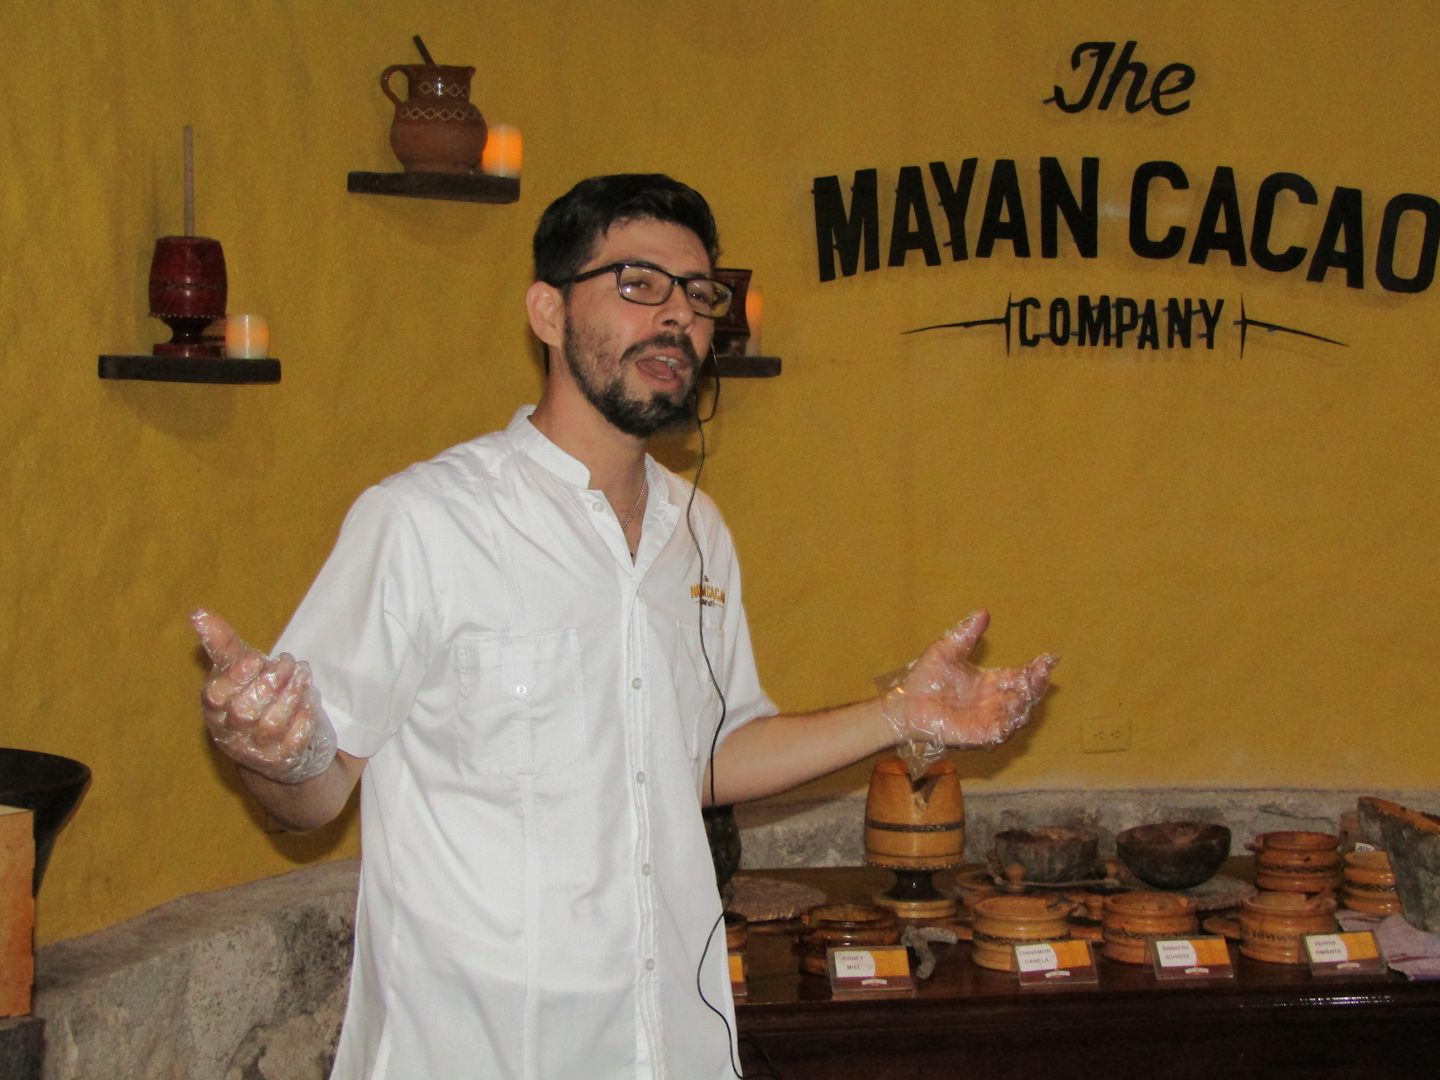 Alex from the Cacao Factory gave an interesting talk!